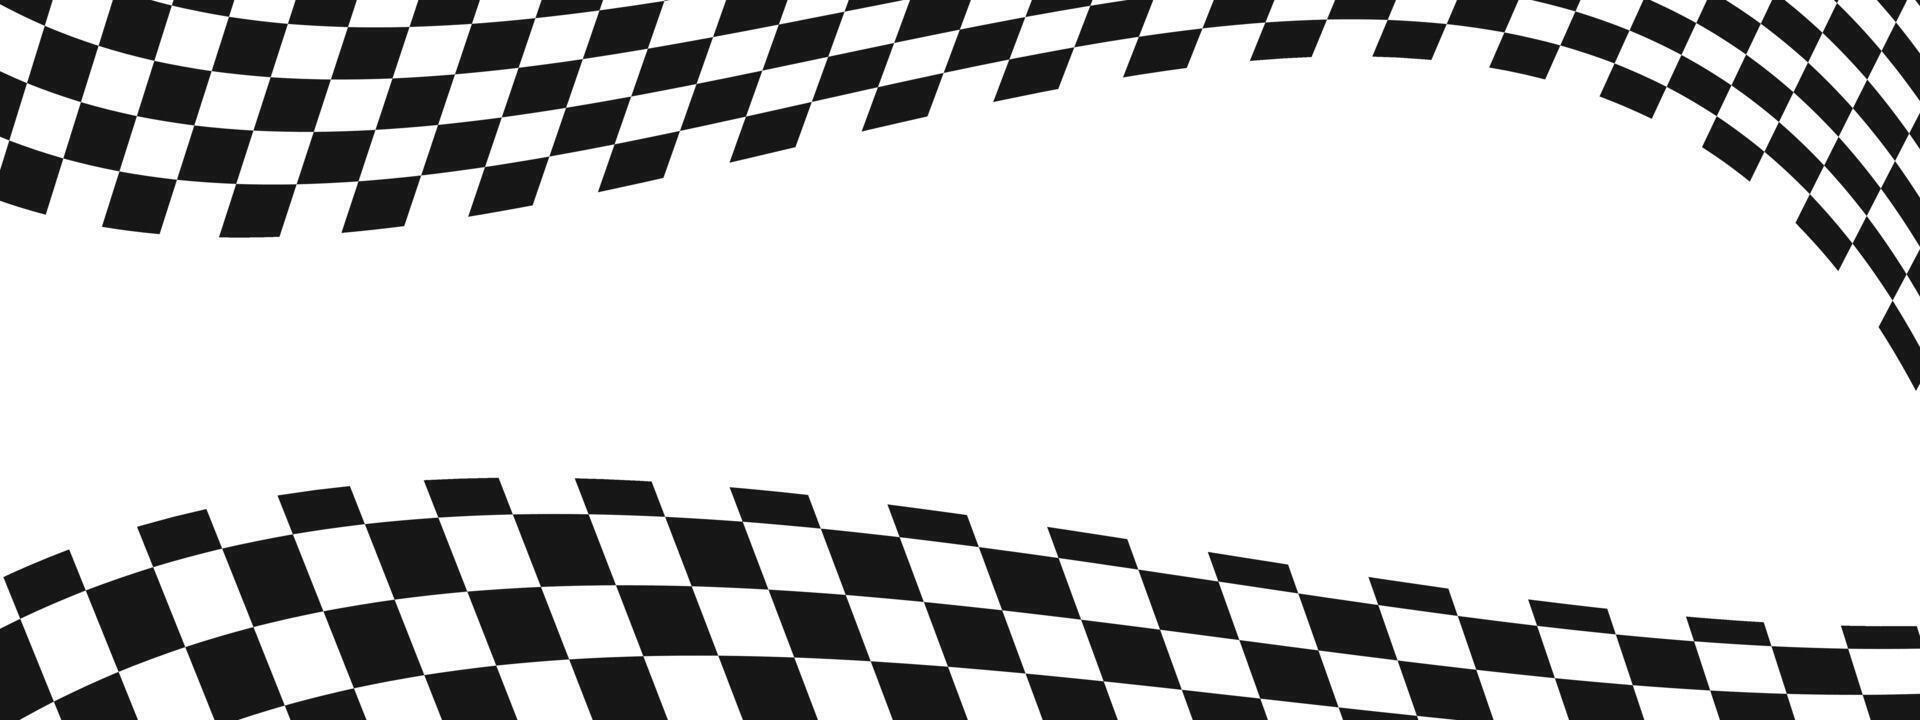 Waving race flags background with copyspace. Motocross, rally, sport car competition wallpaper. Warped black and white squares pattern. Checkered winding texture. vector